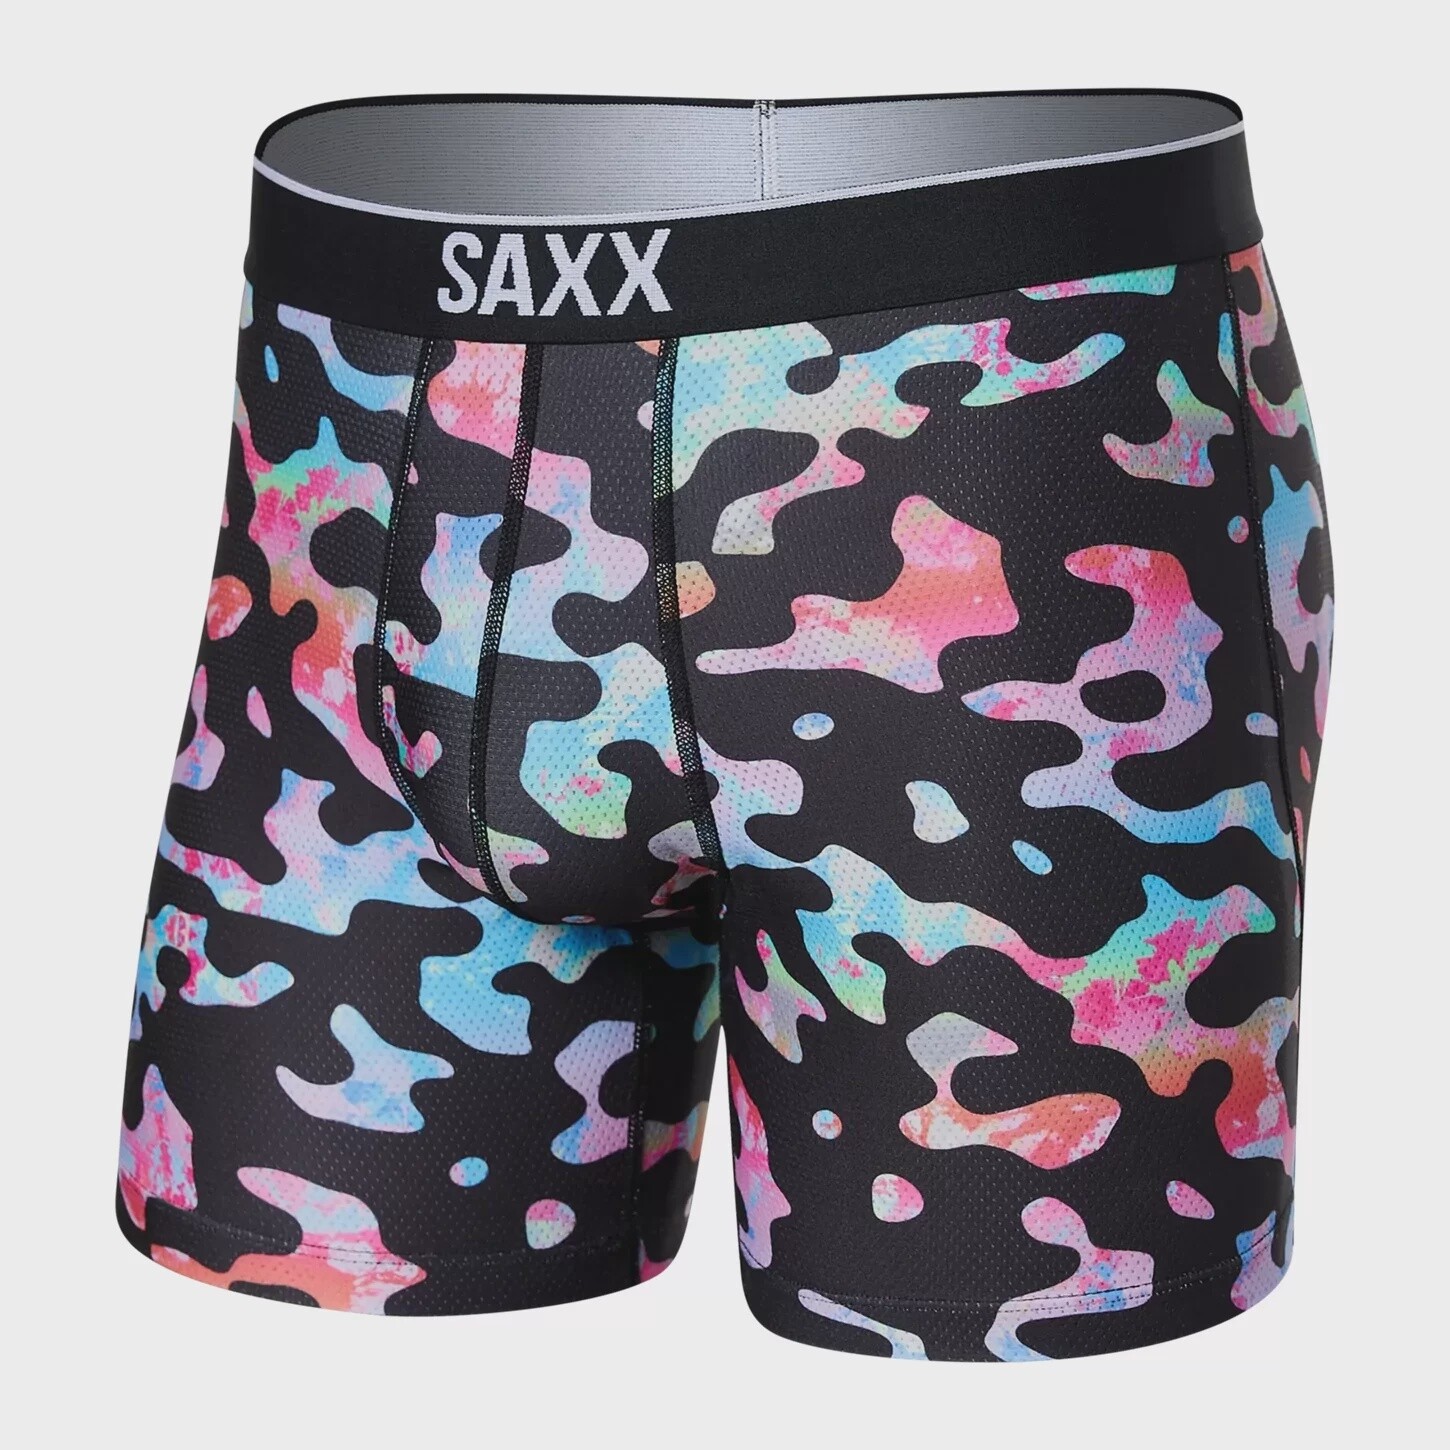 SAXX - Volt - Washed Out Camo